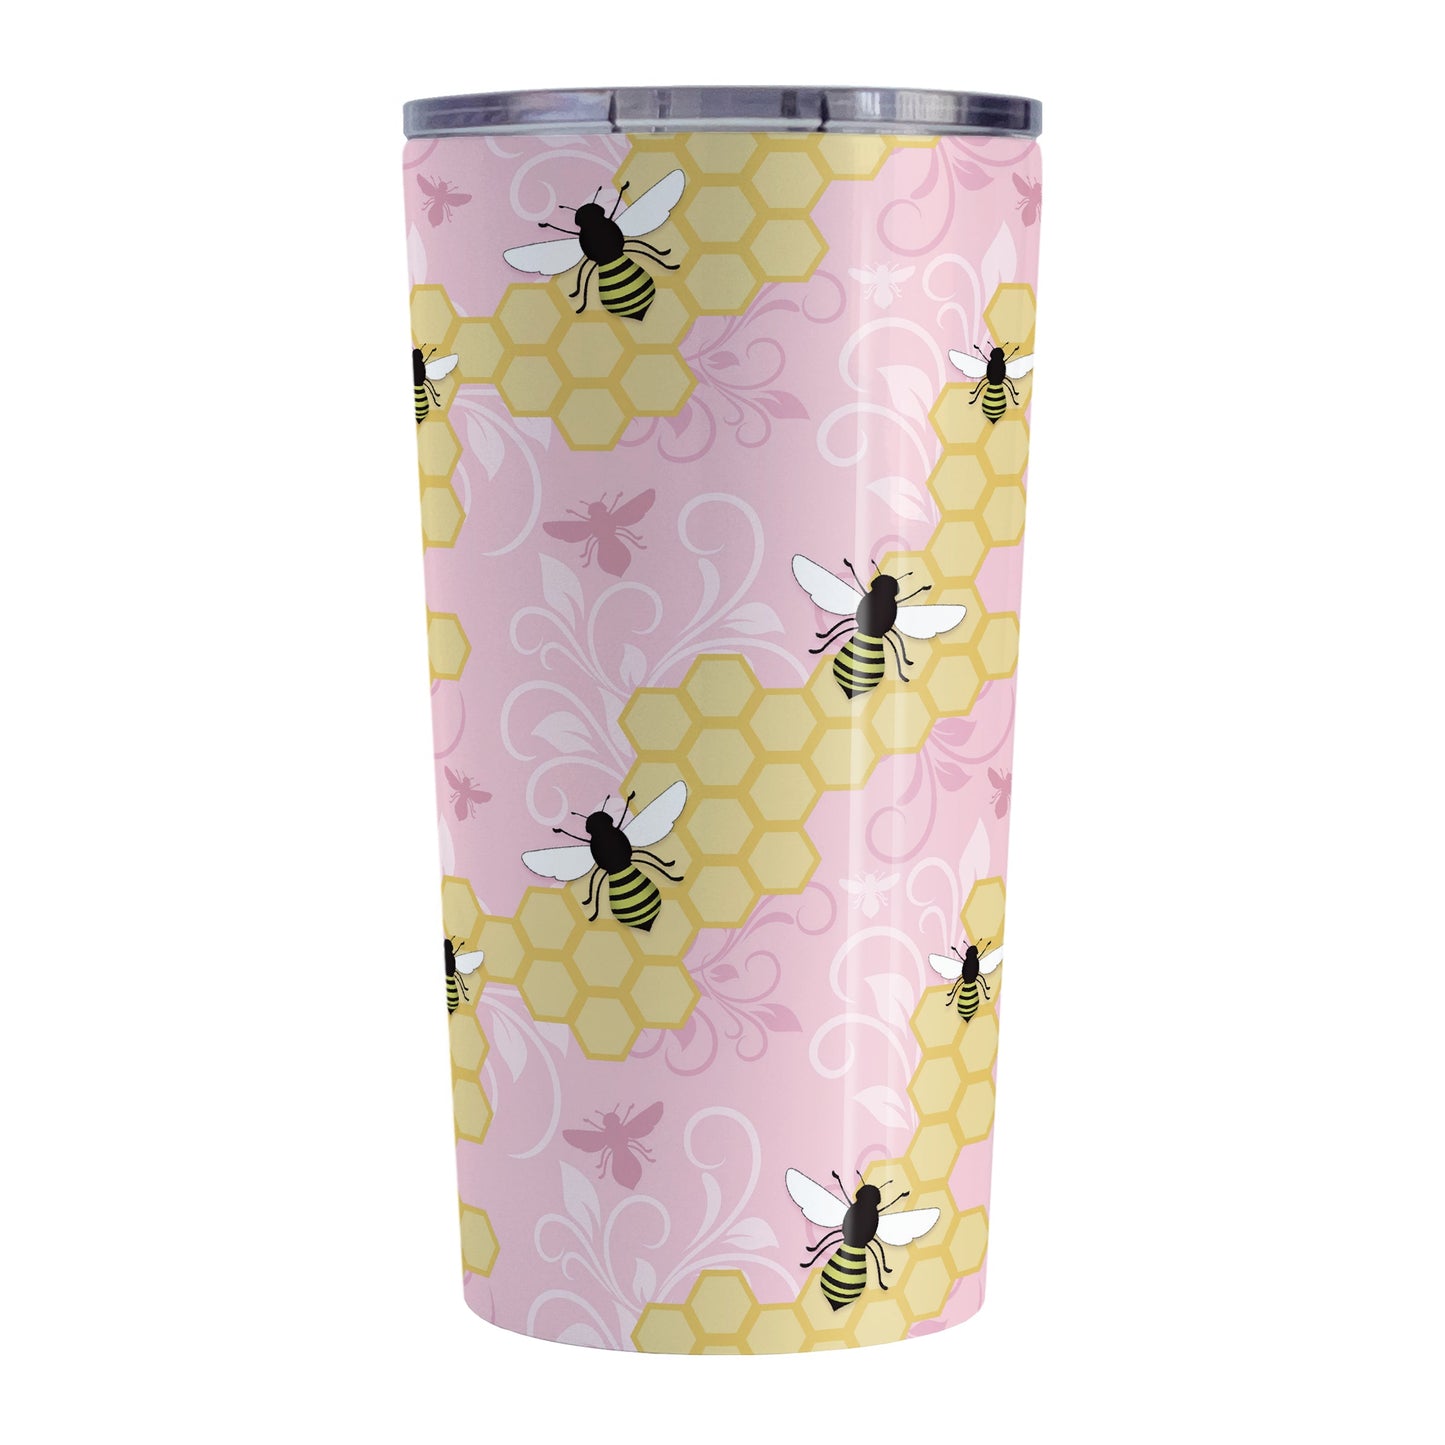 Pink Honeycomb Bee Tumbler Cup (20oz, stainless steel insulated) at Amy's Coffee Mugs. A tumbler cup designed with a pattern of black and yellow bees on honeycomb lines over a pink flourish background that wraps around the cup.